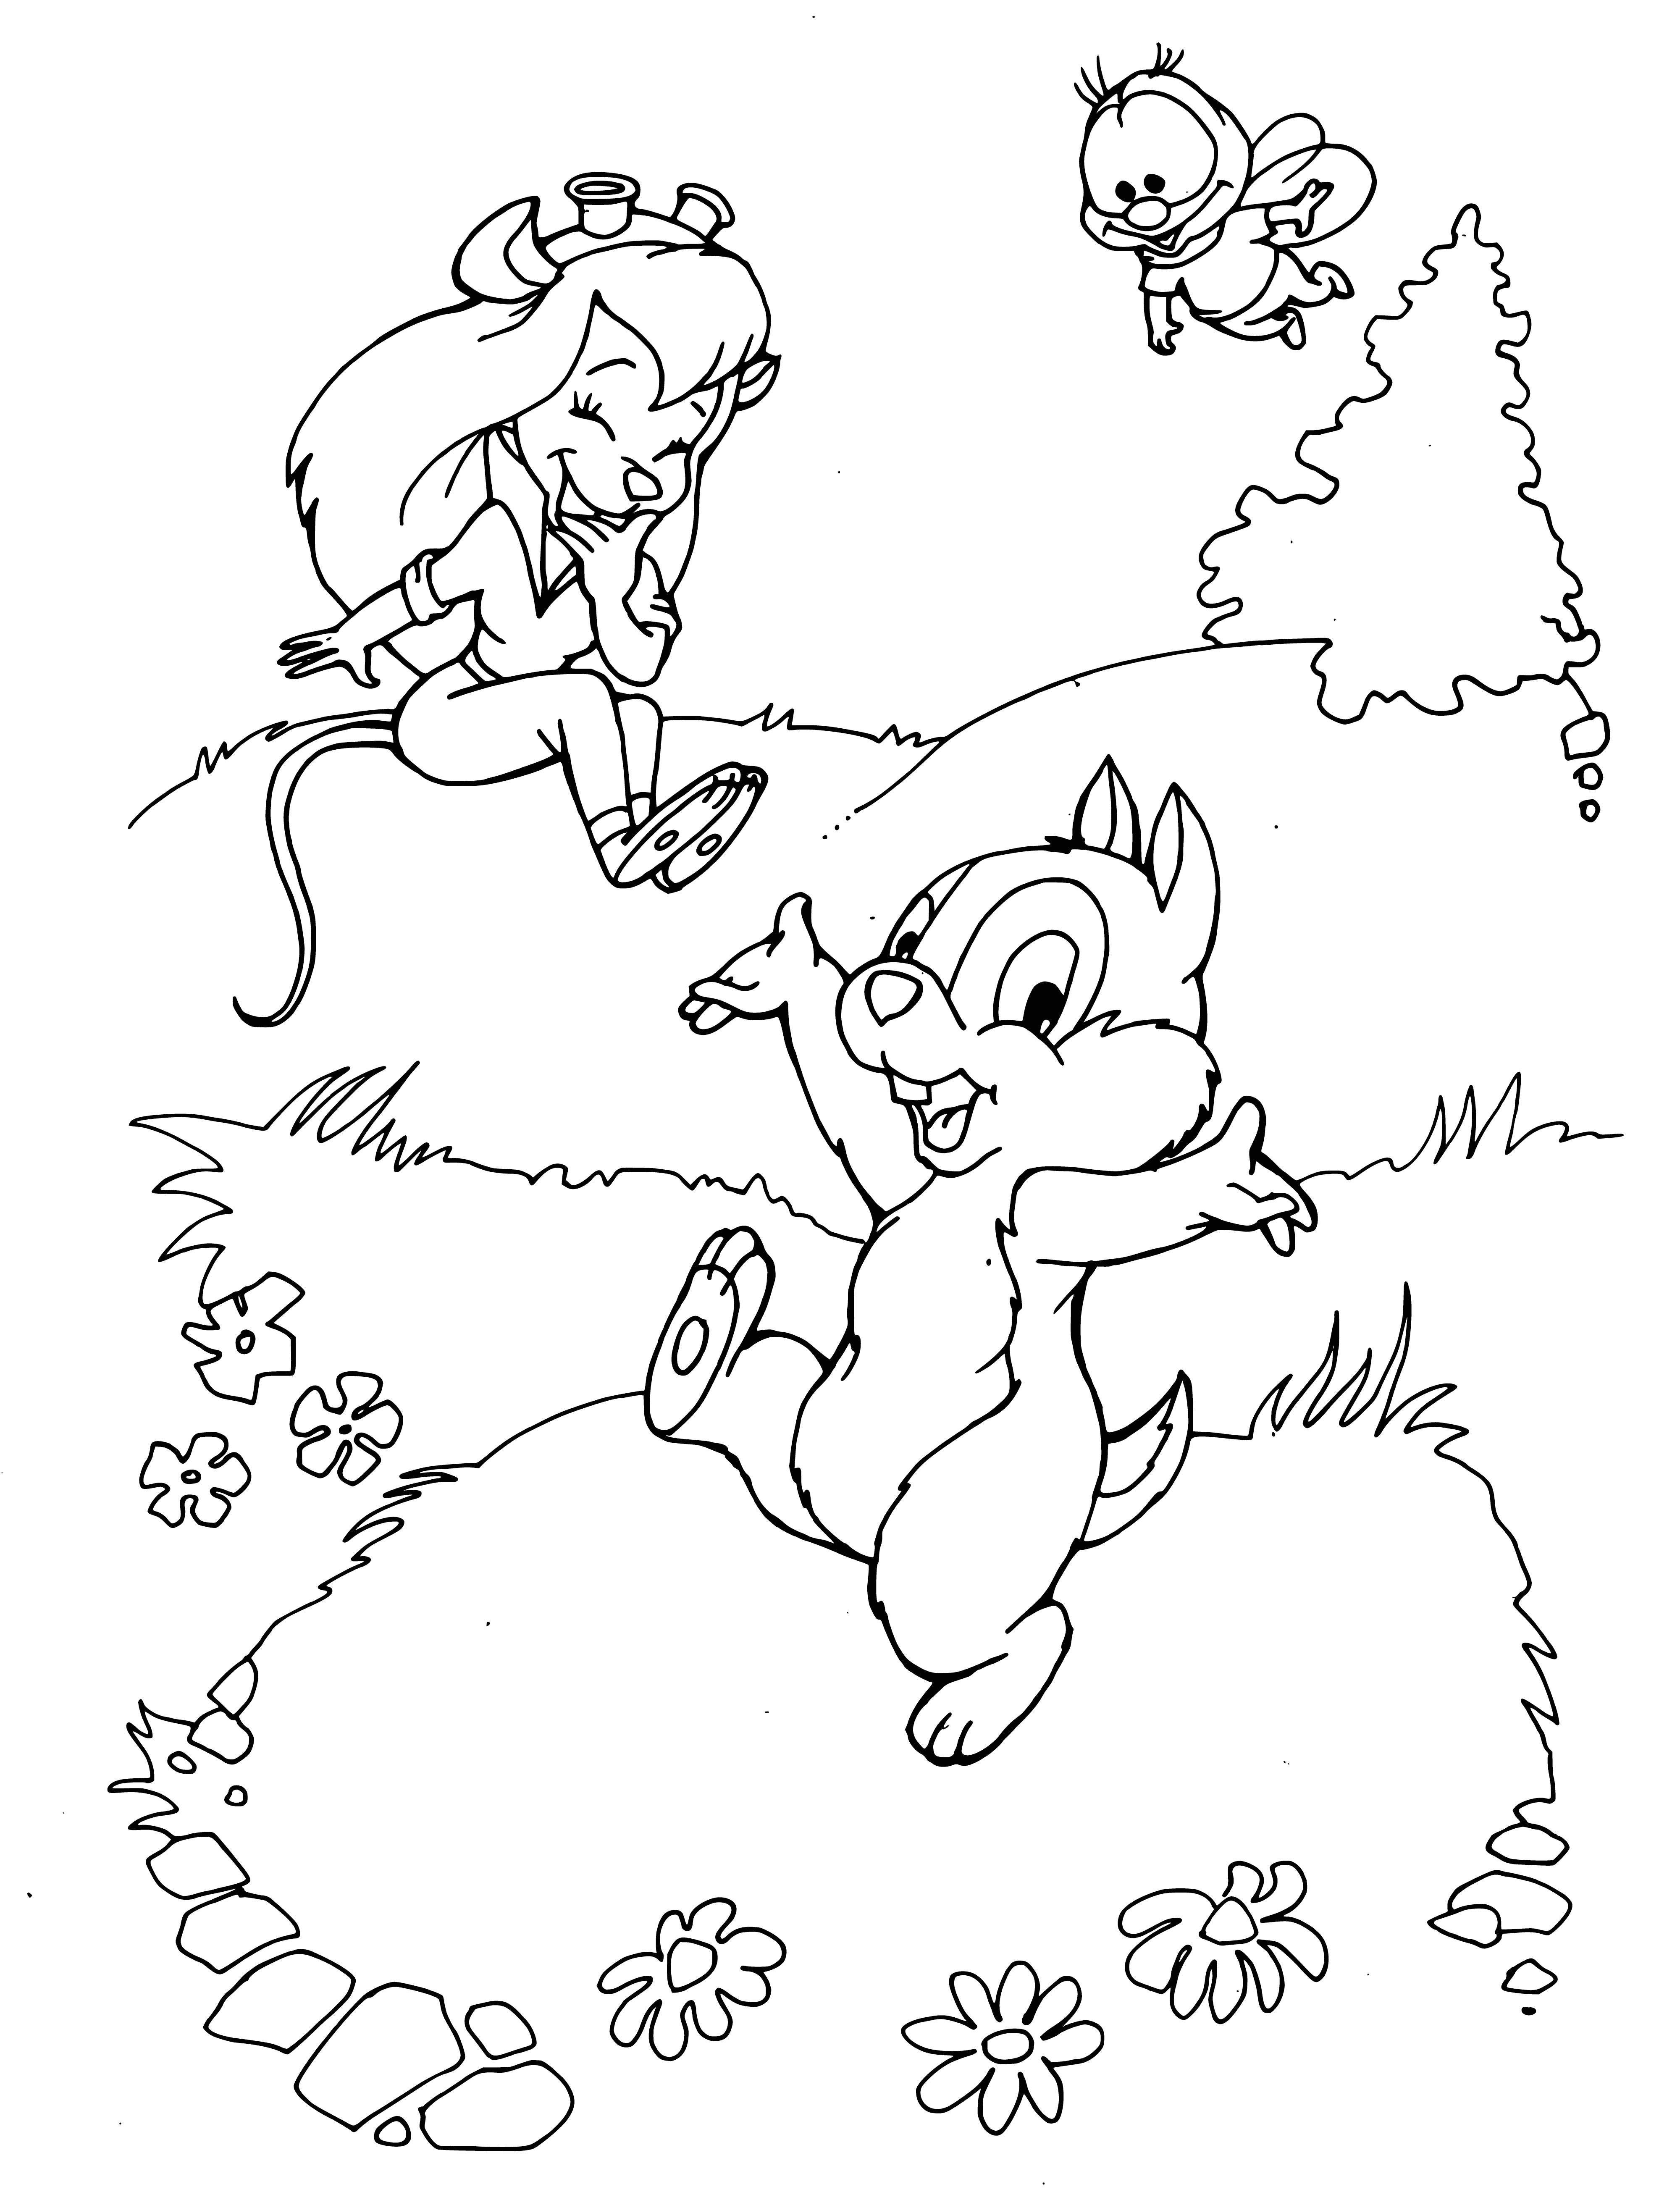 coloring page: 3 friends living together in blue shirts, red hats, white/black bellies, black eyes & brown/white noses.